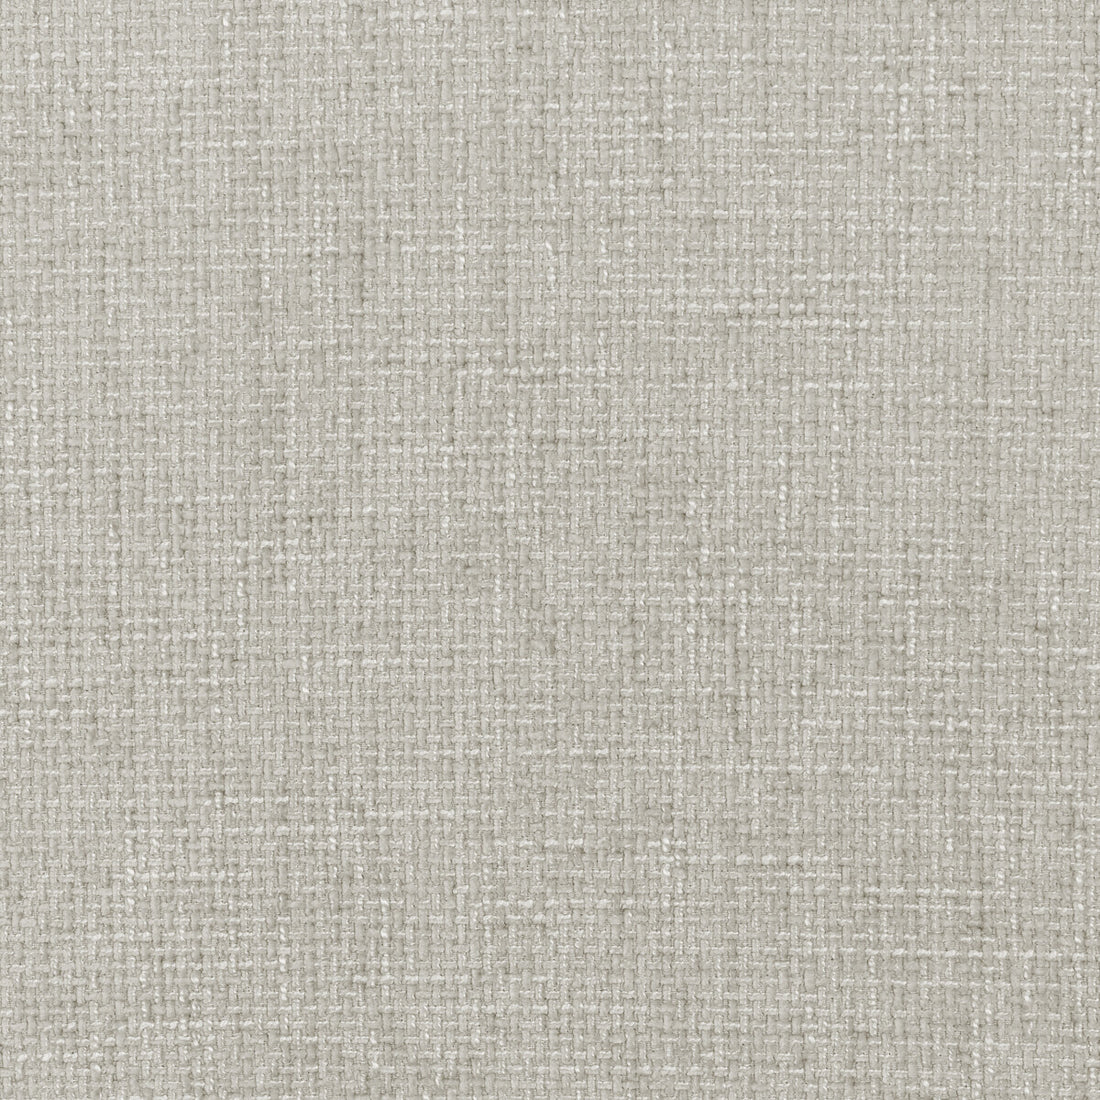 Kravet Smart fabric in 36305-11 color - pattern 36305.11.0 - by Kravet Smart in the Performance Crypton Home collection